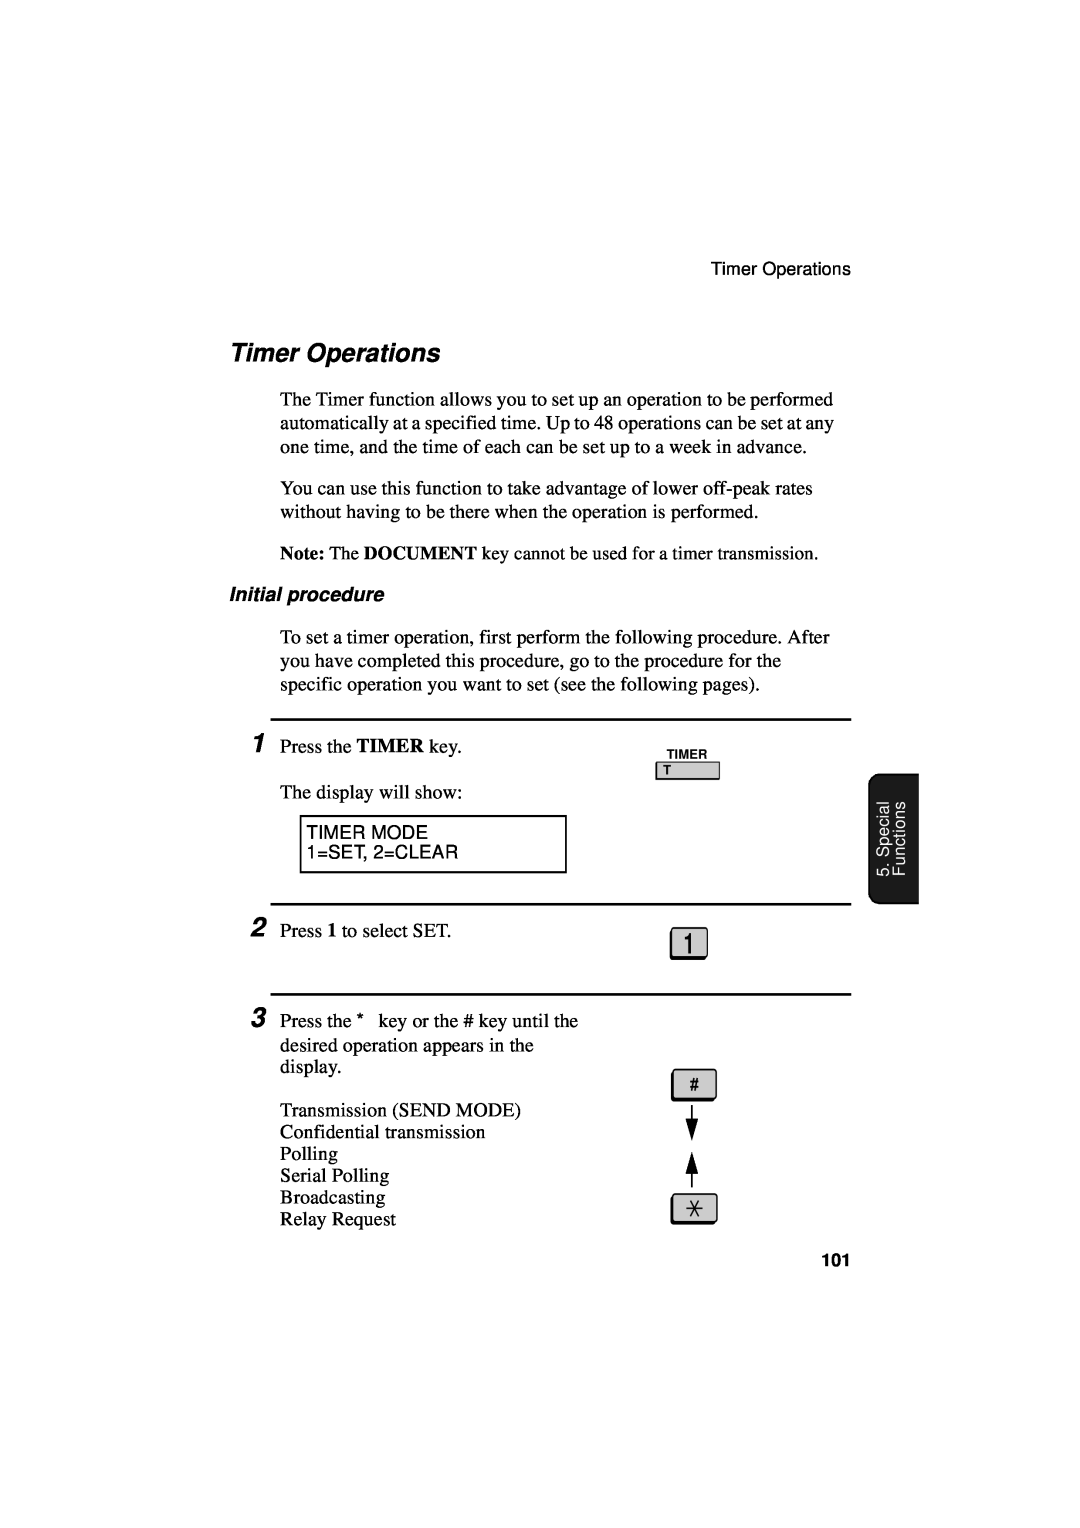 Sharp FO-4700, FO-5700, FO-5550 operation manual Timer Operations, Initial procedure 